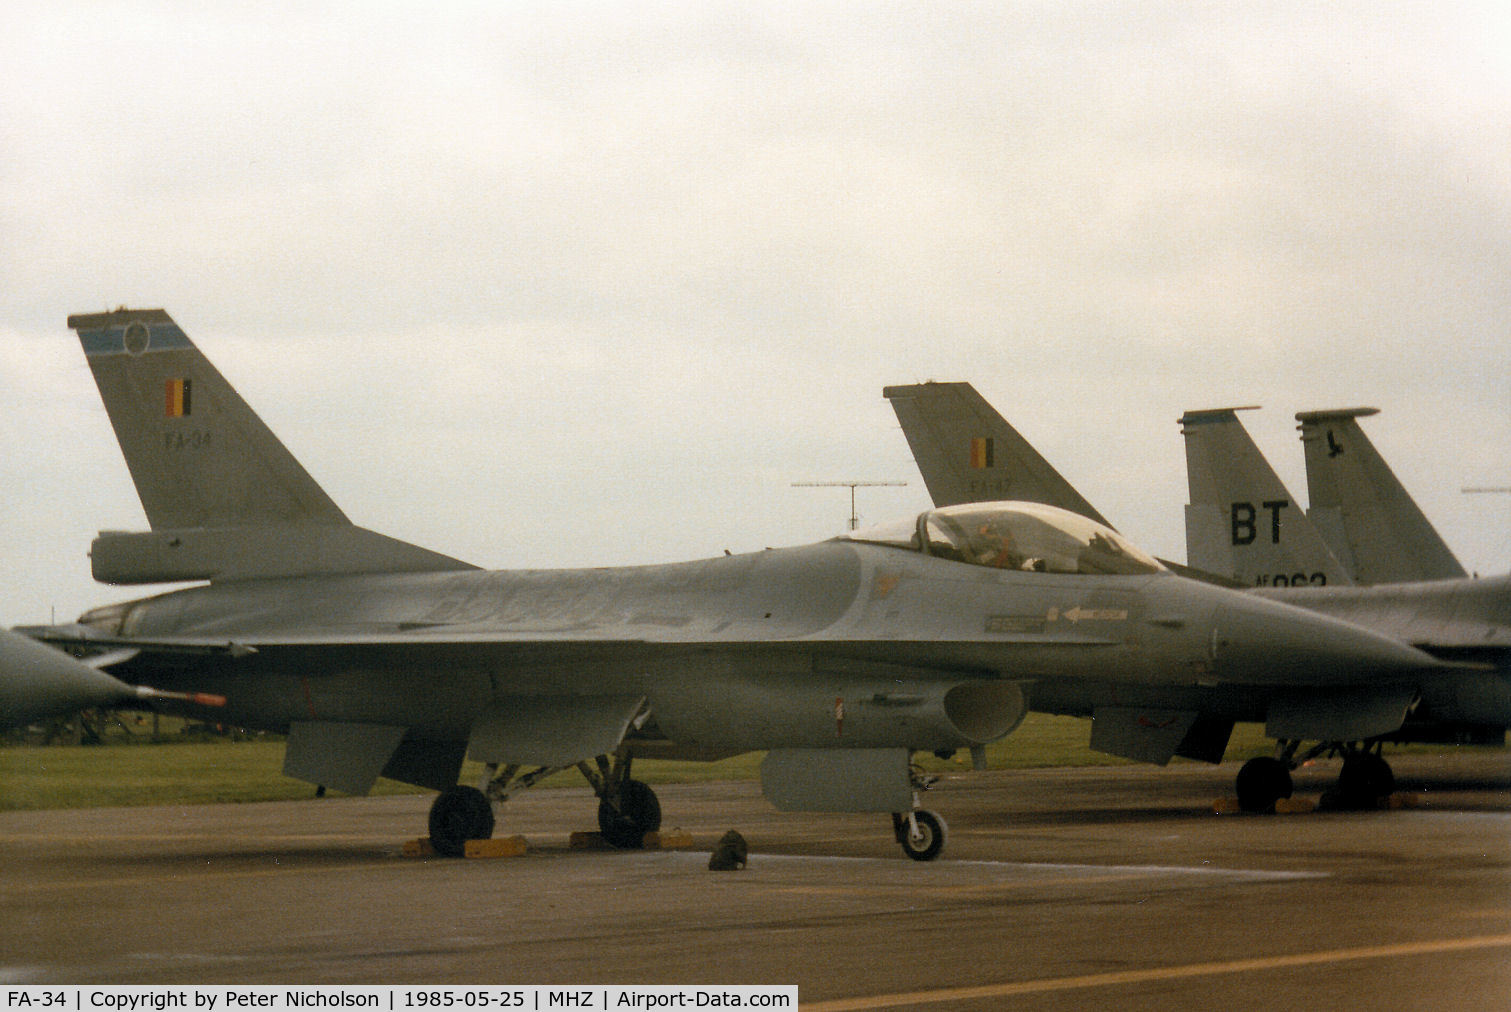 FA-34, 1980 SABCA F-16A Fighting Falcon C/N 6H-34, F-16A Falcon of 1 Wing Belgian Air Force on the flight-line at the 1985 RAF Mildenhall Air Fete.